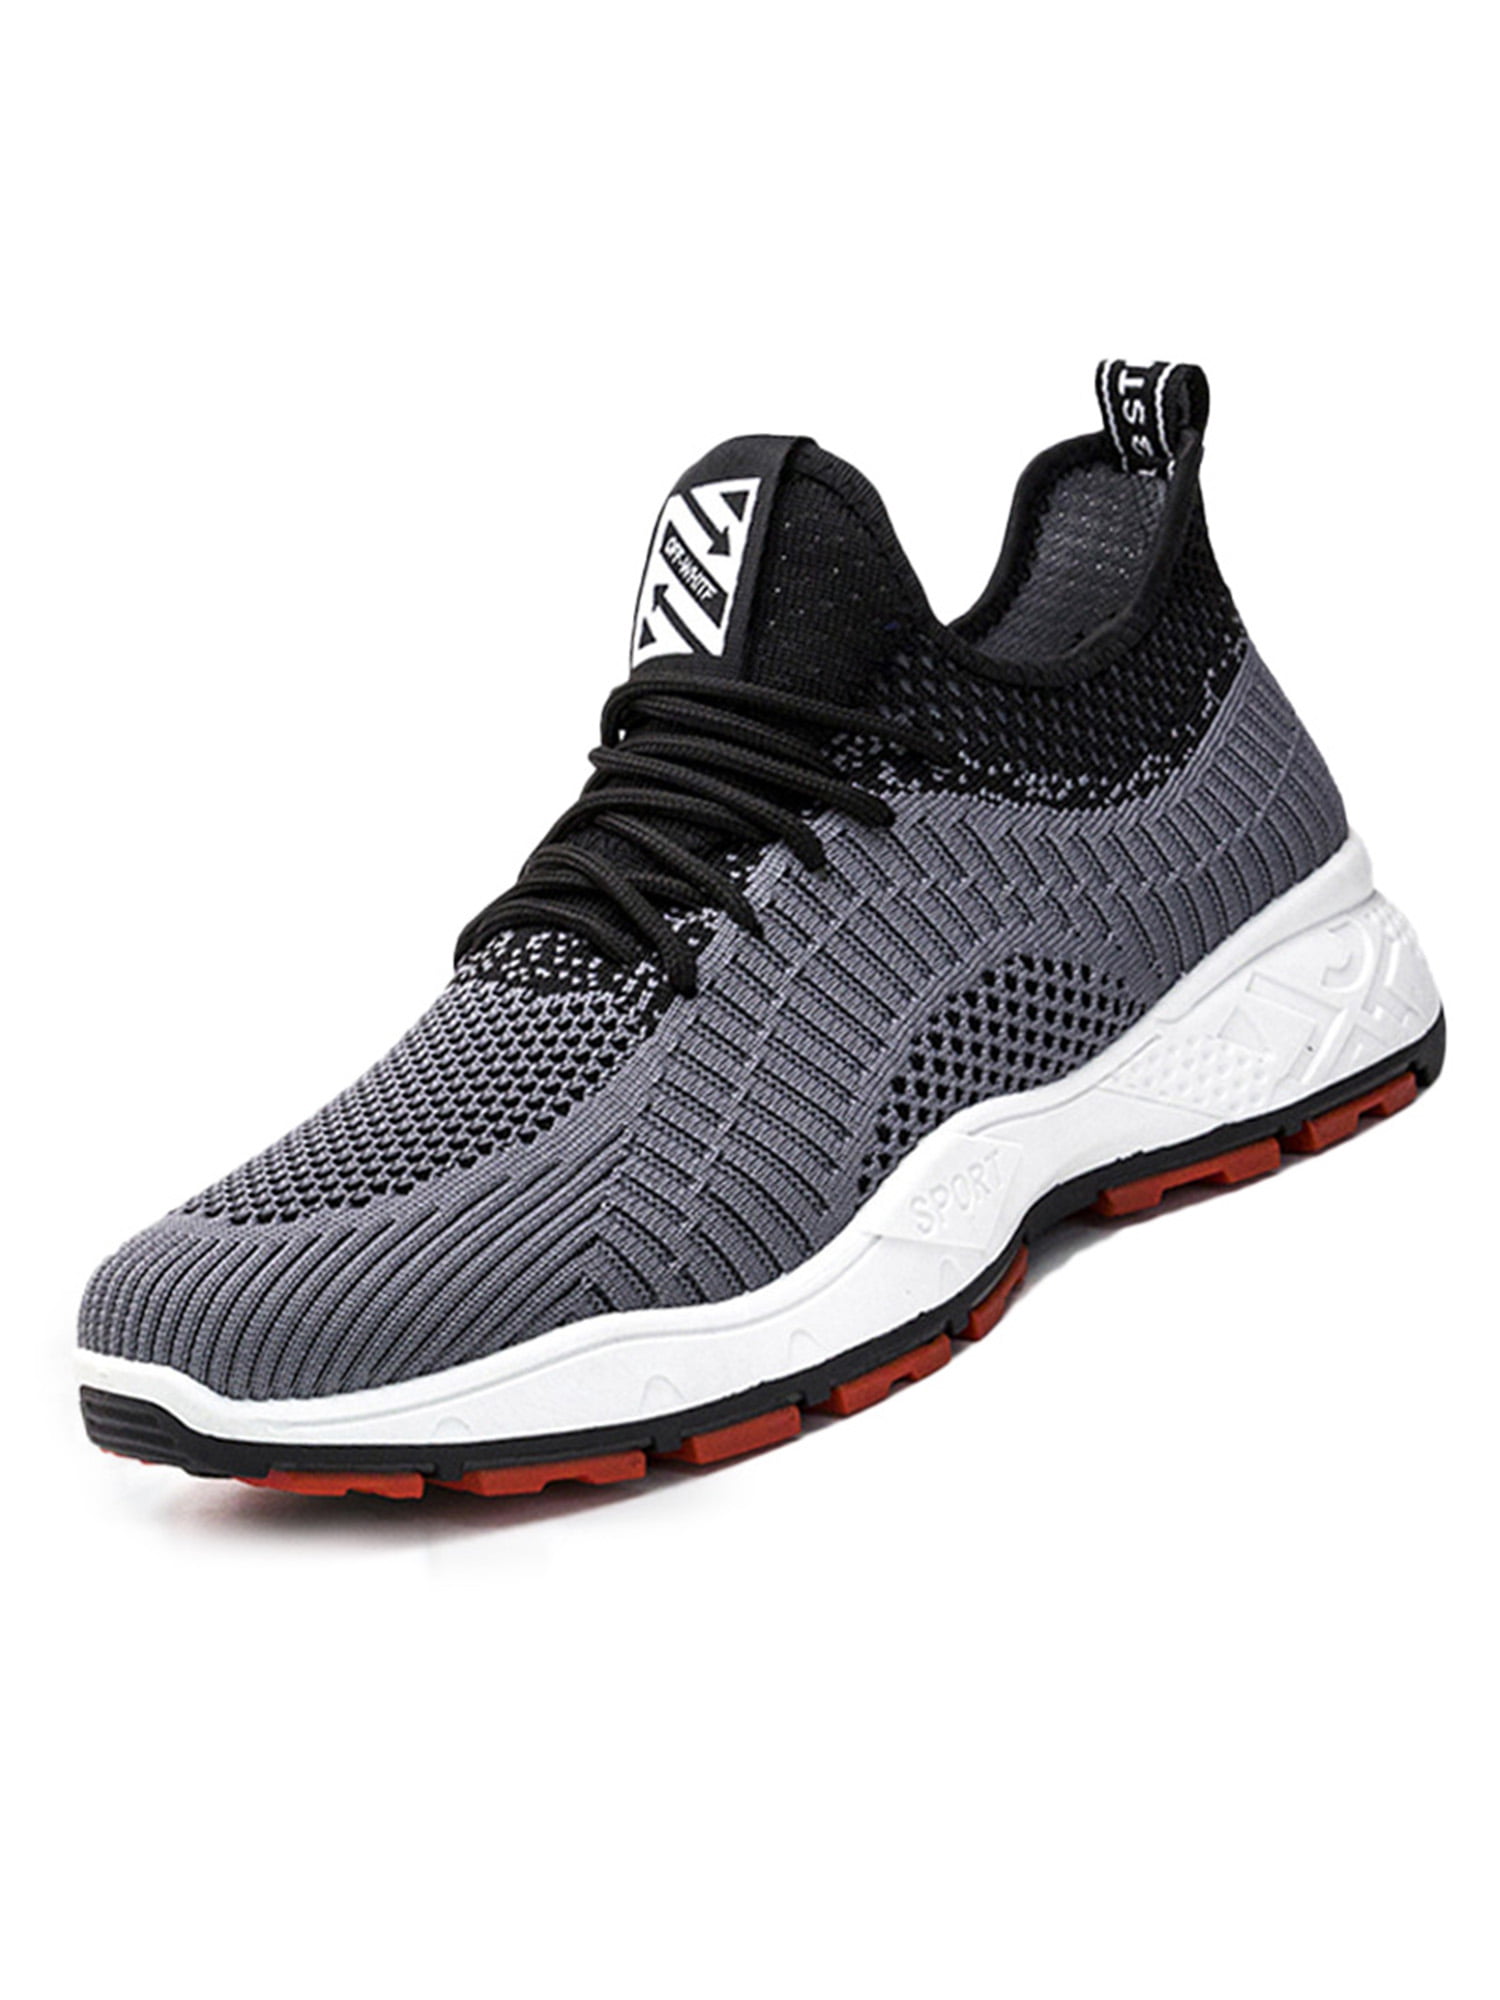 Details about   MENS NEW RUNNING GYM TRAINERS SPORT LIGHTWEIGHT BOYS WALKING SHOES SNEAKERS 